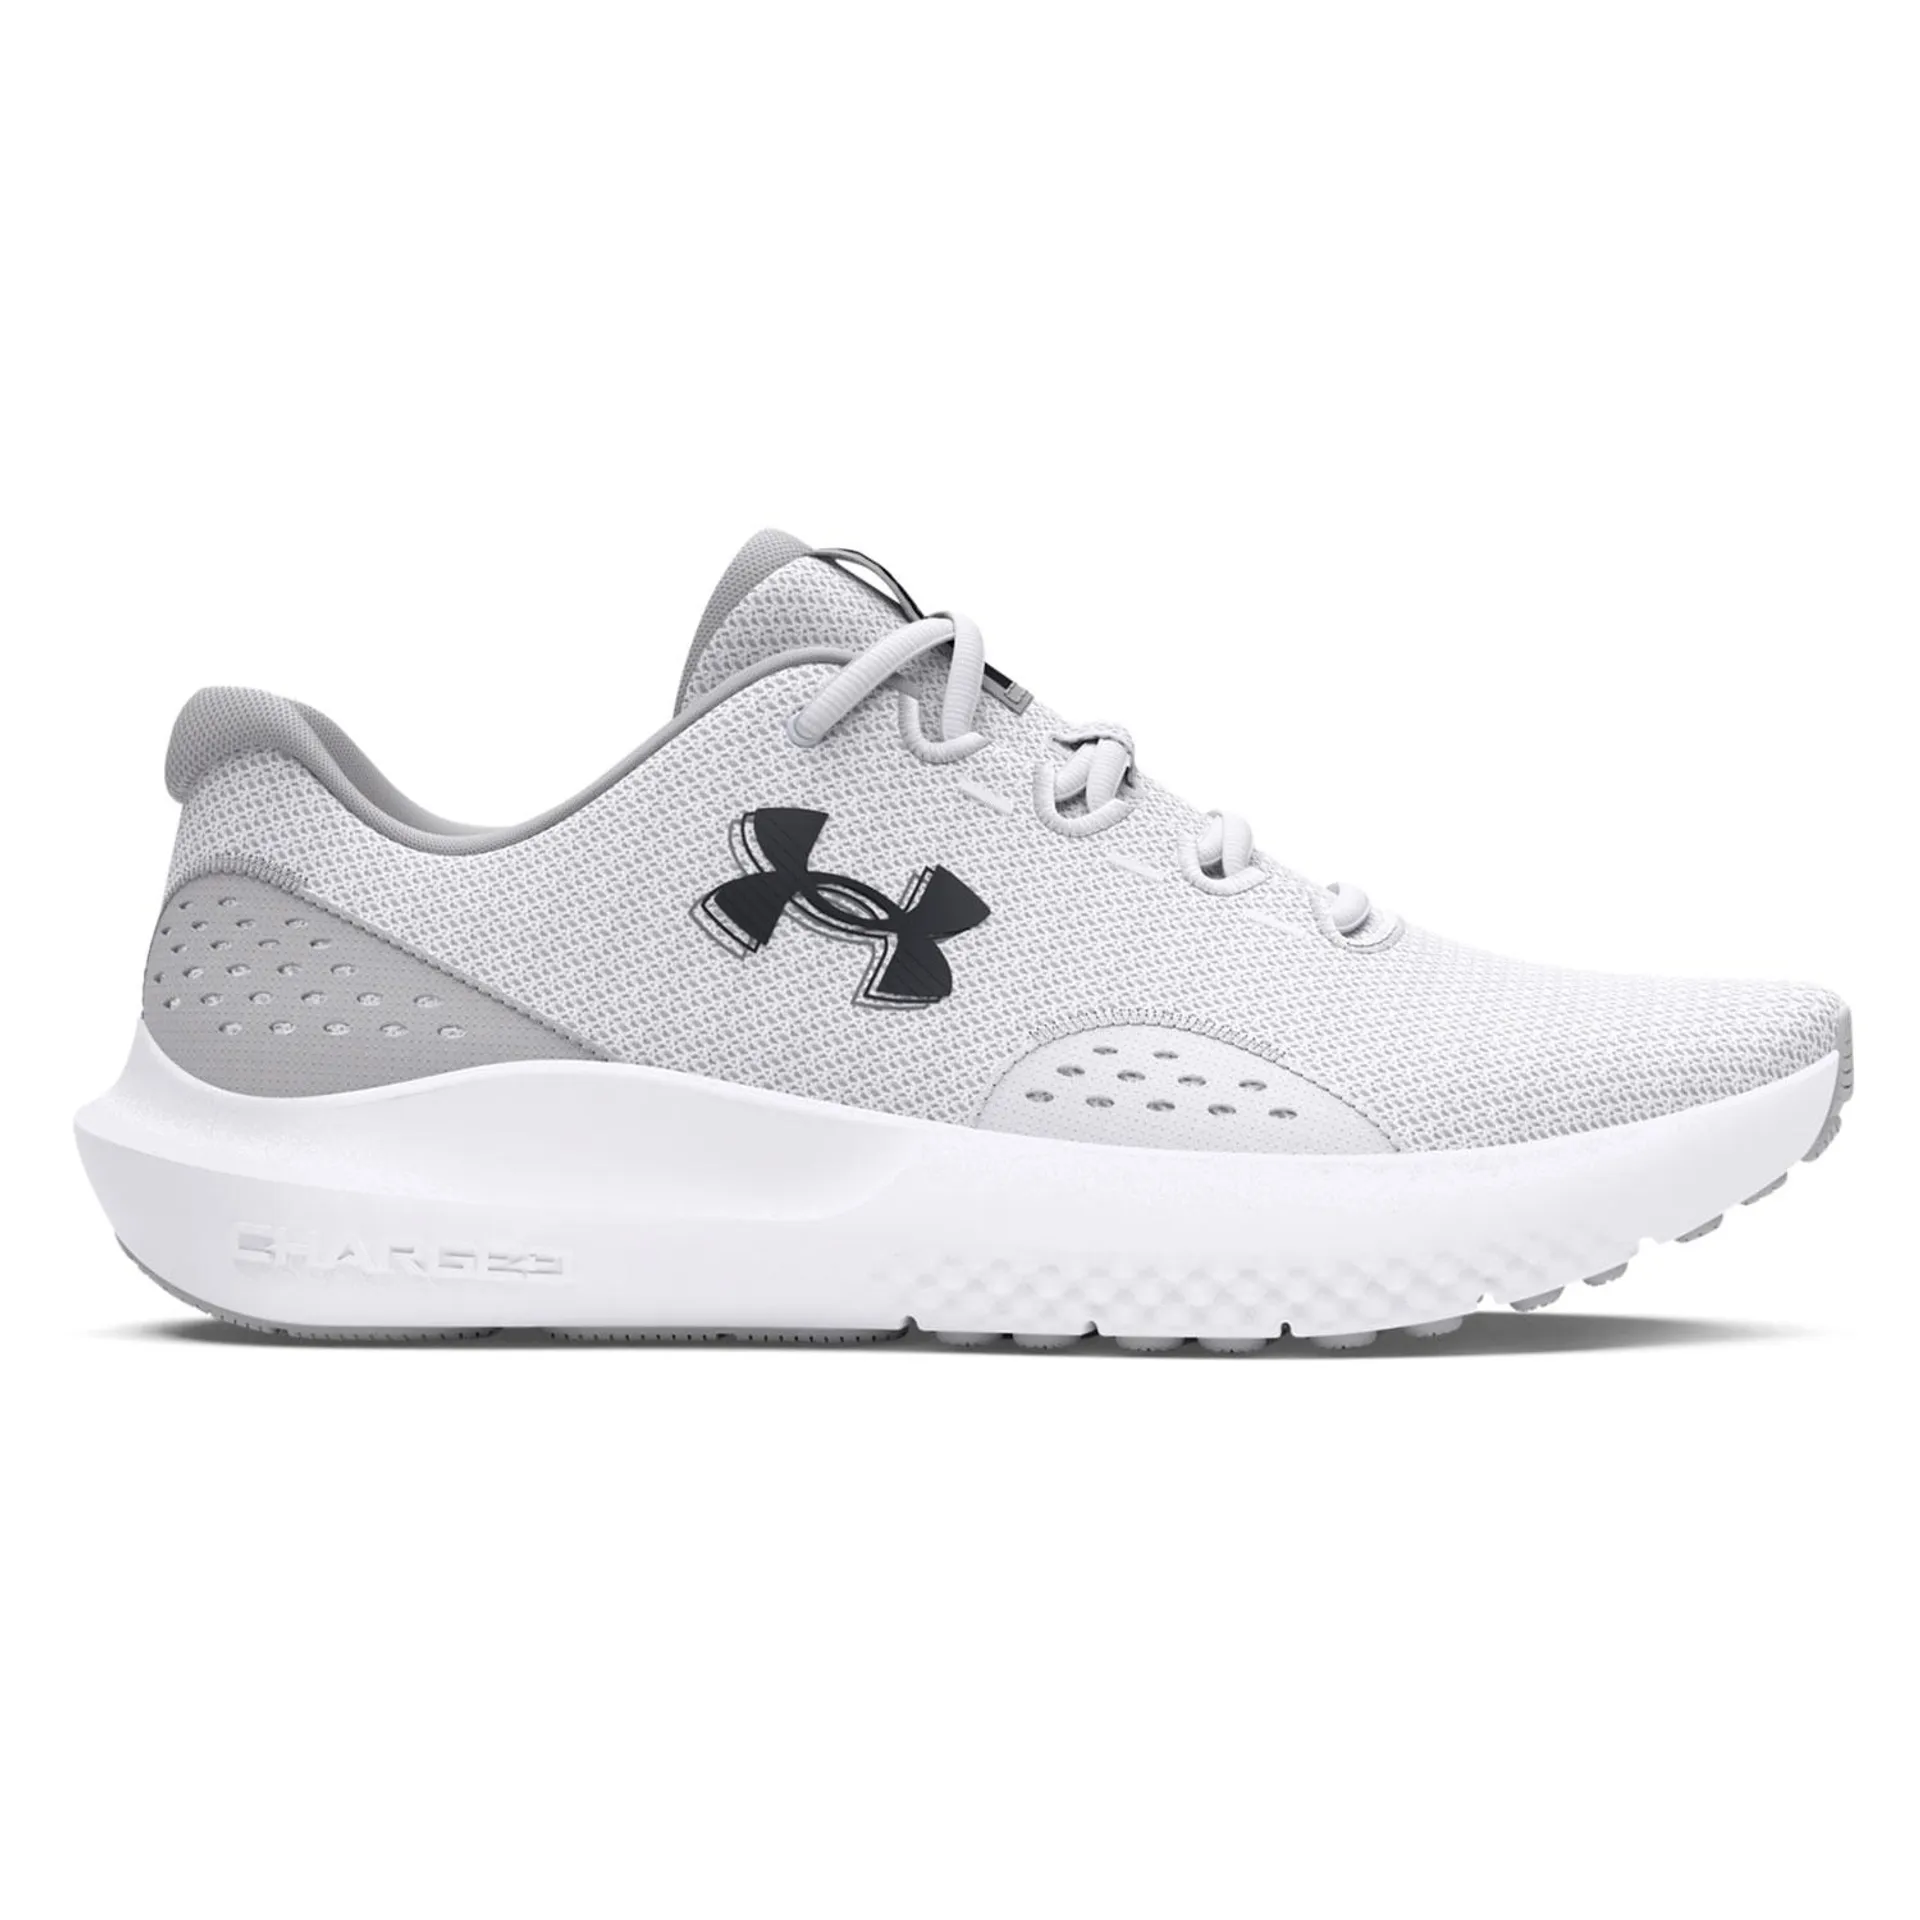 Under Armour Surge 4 Men's Running Shoes